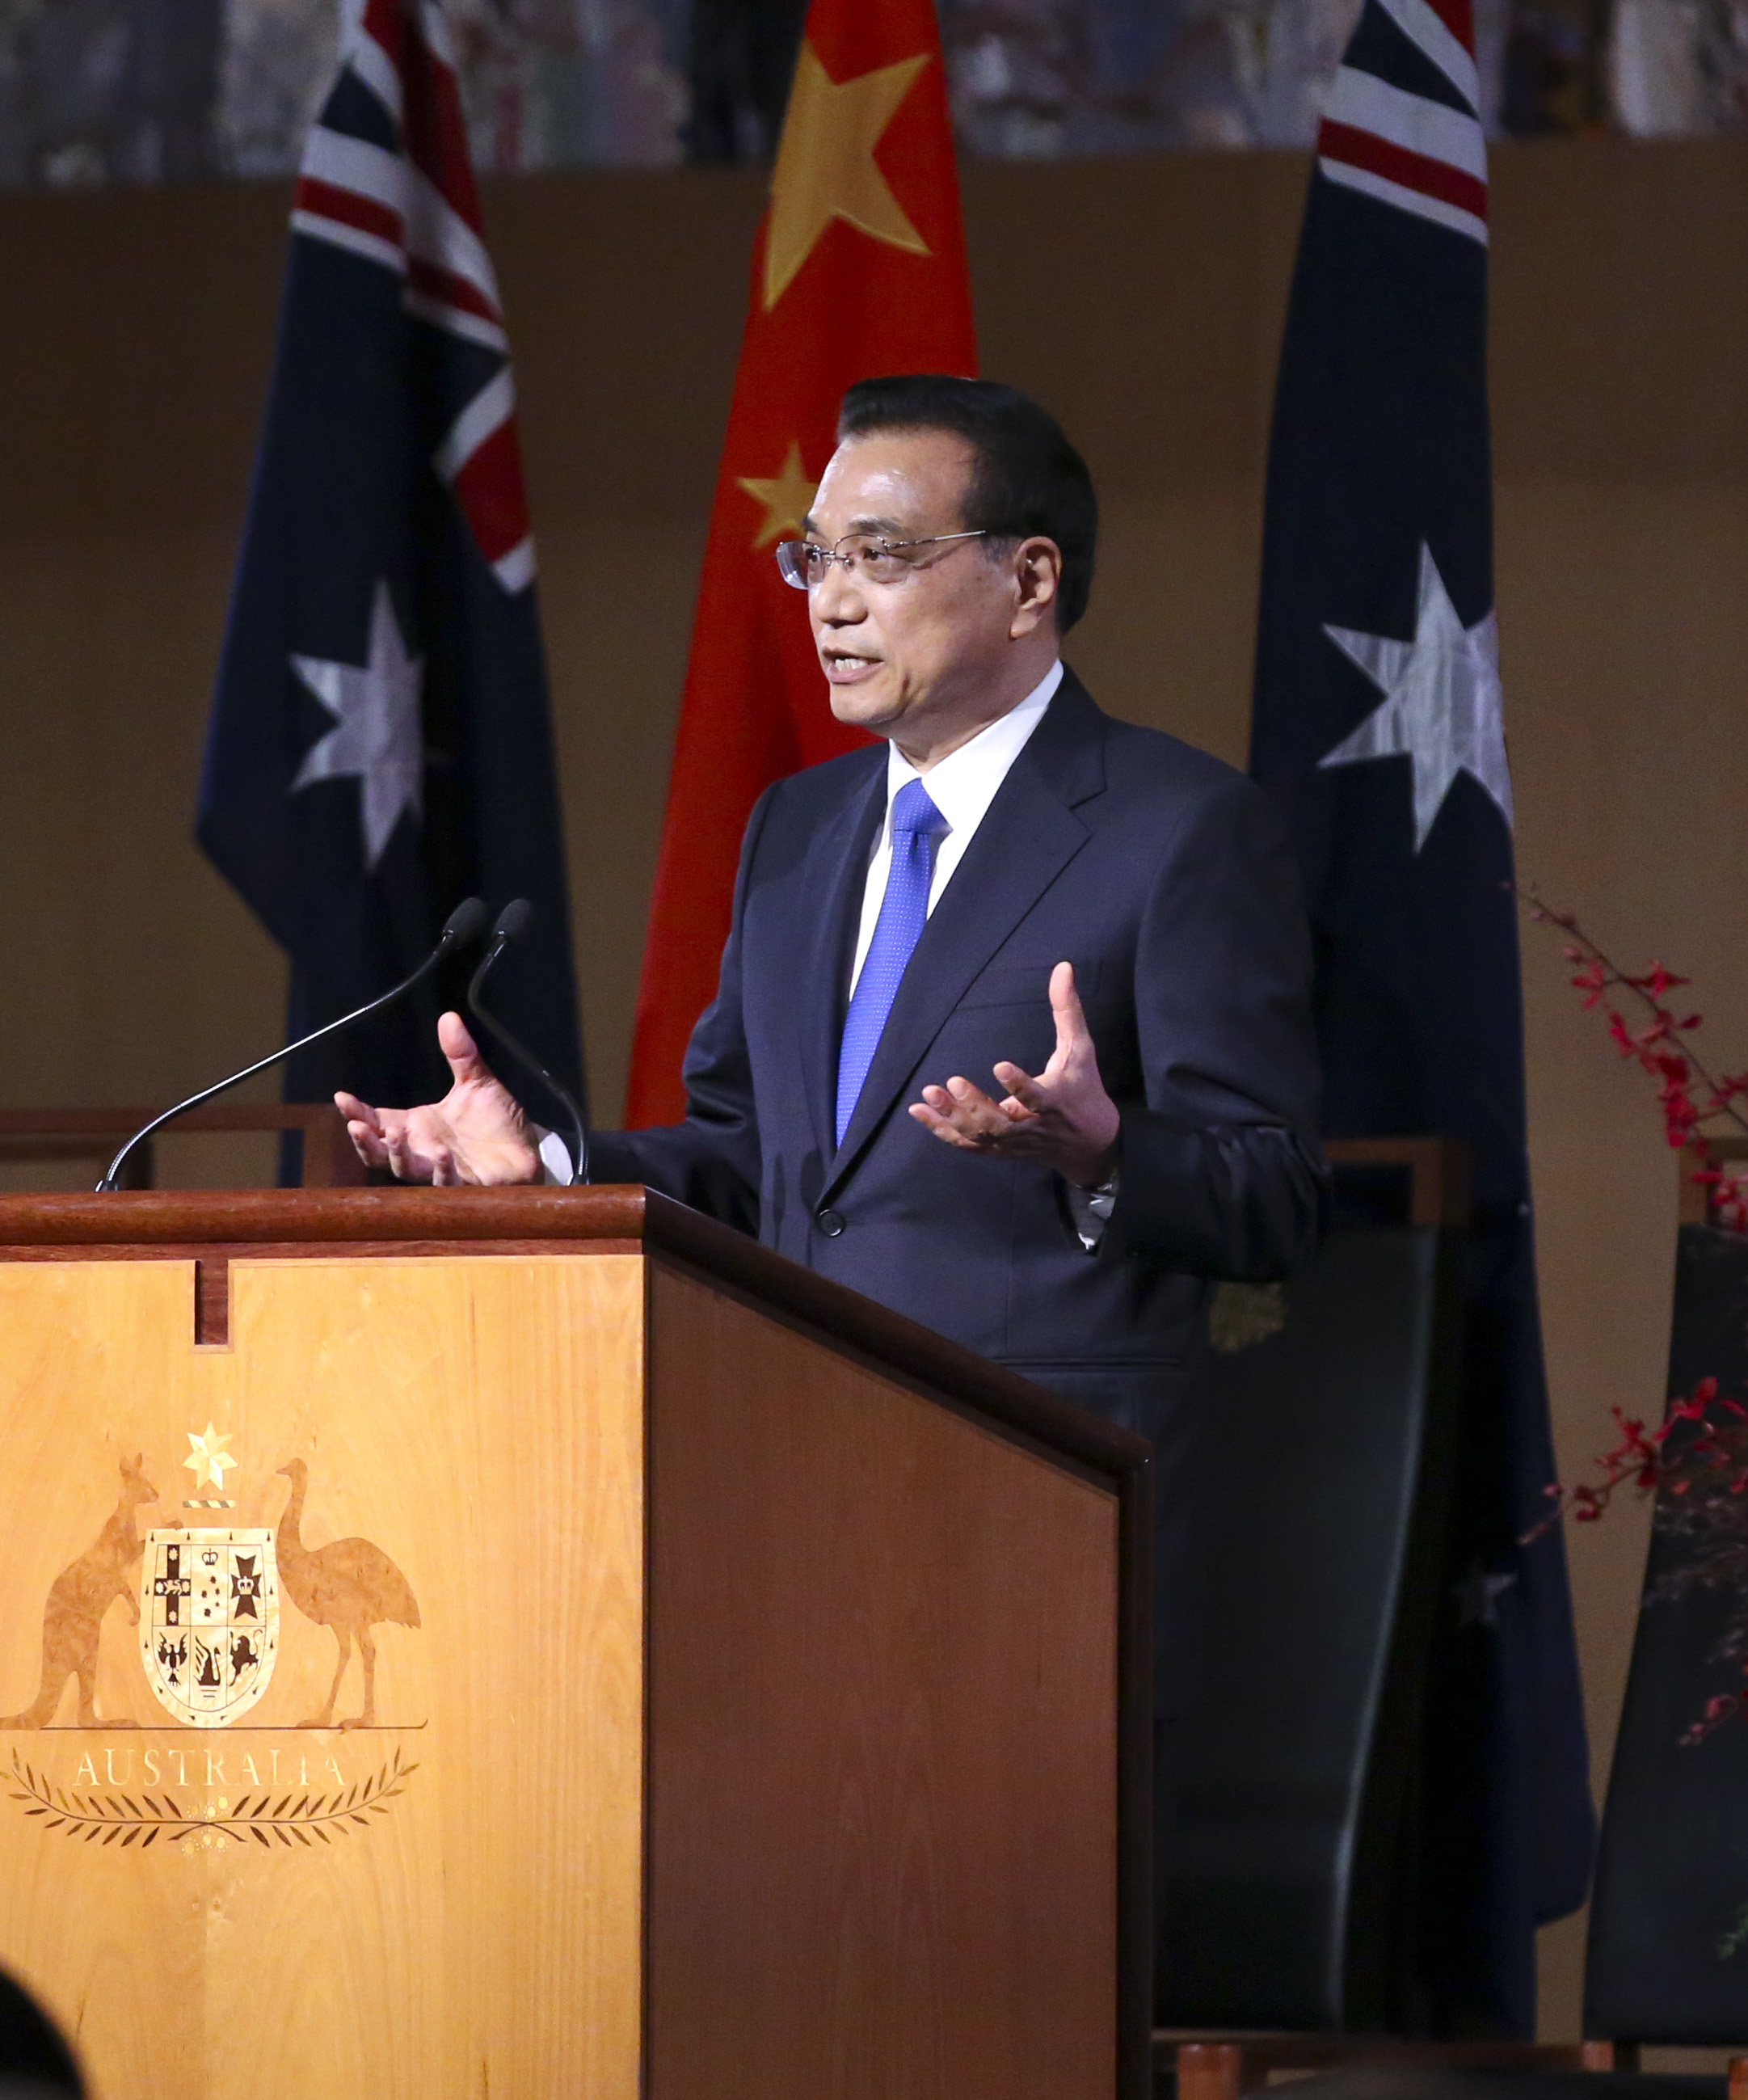 Chinese Premier Li Keqiang delivers a speech during a welcome banquet held by Australian counterpart Malcolm Turnbull in Canberra, Australia, on Thursday, March 23, 2017. Premier Li arrived in the Australian capital of Canberra Wednesday night for an official visit. [Photo: gov.cn]